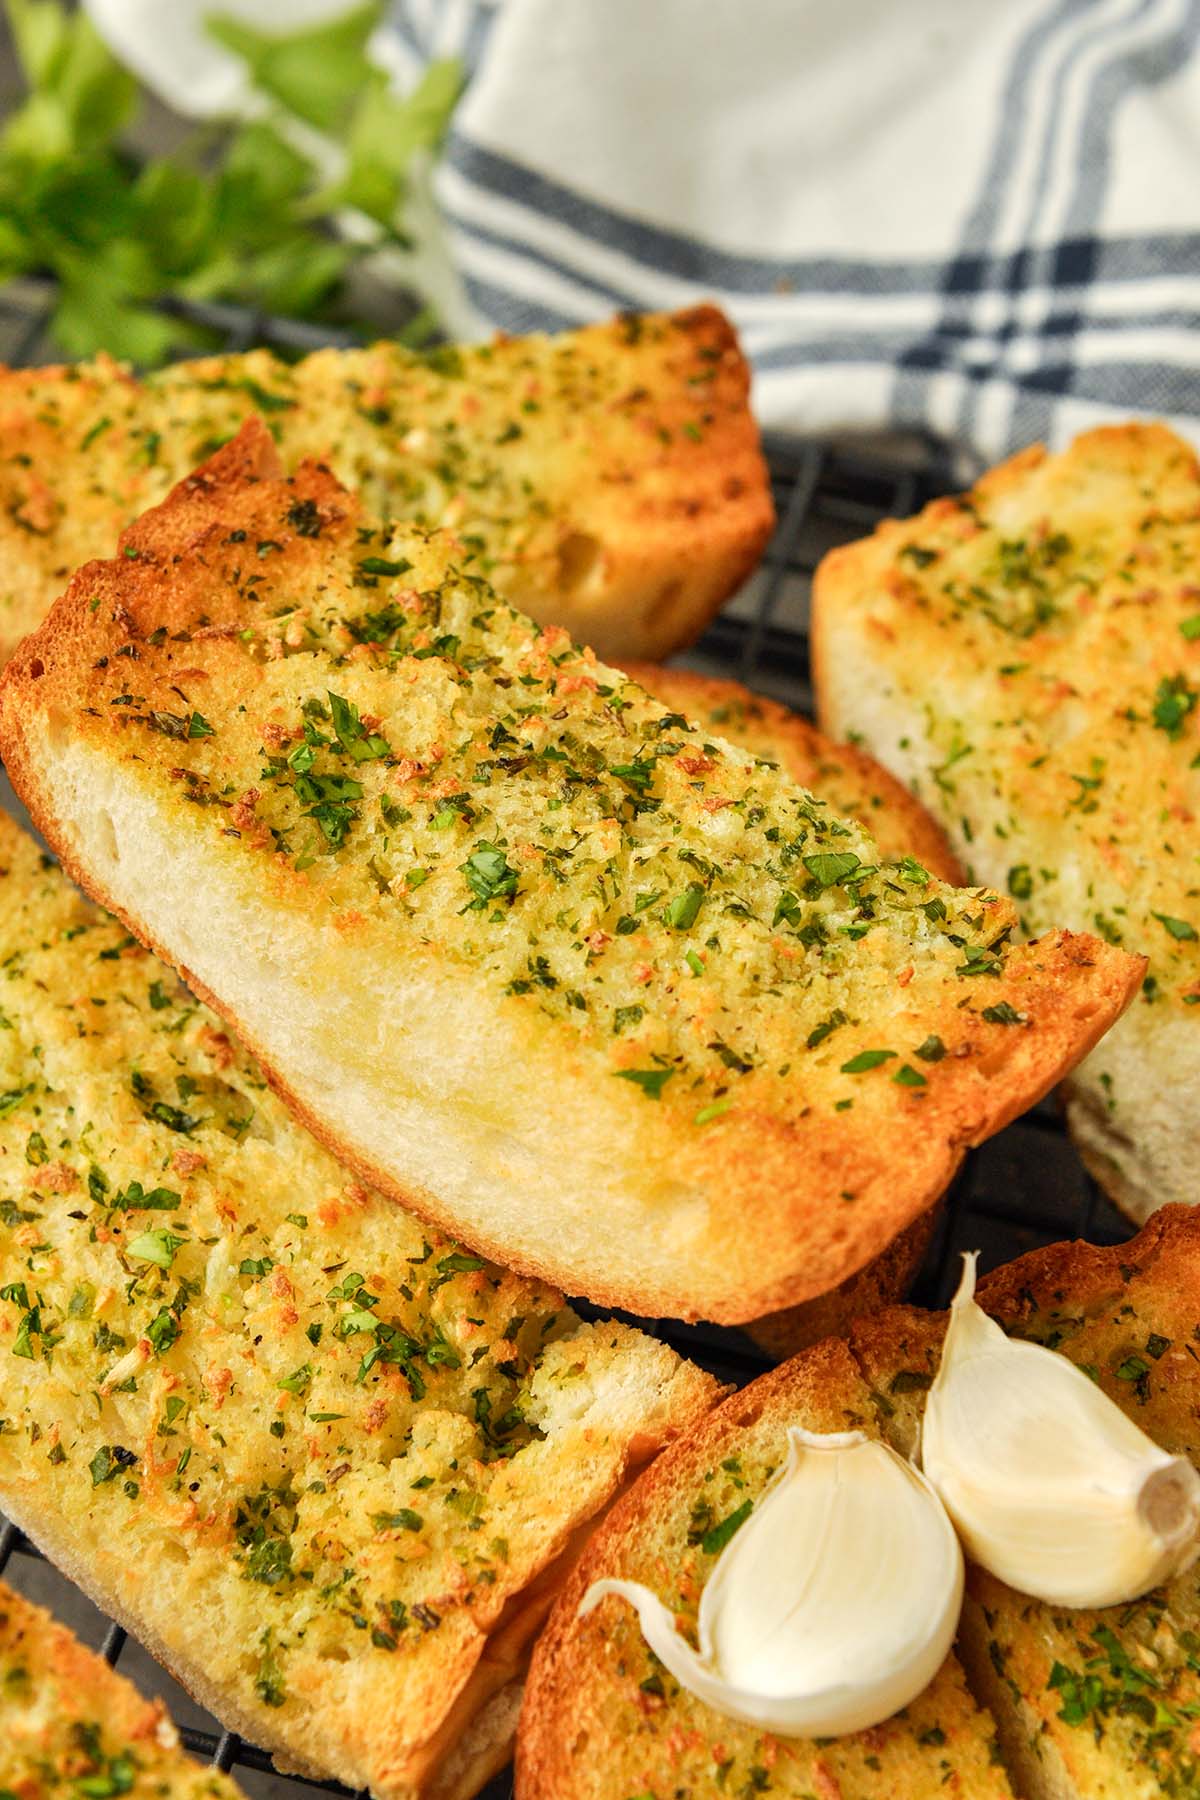 Up close of a chunk of garlic bread surrounded by other pieces of bread  and two pieces of garlic. Striped towel in the background.